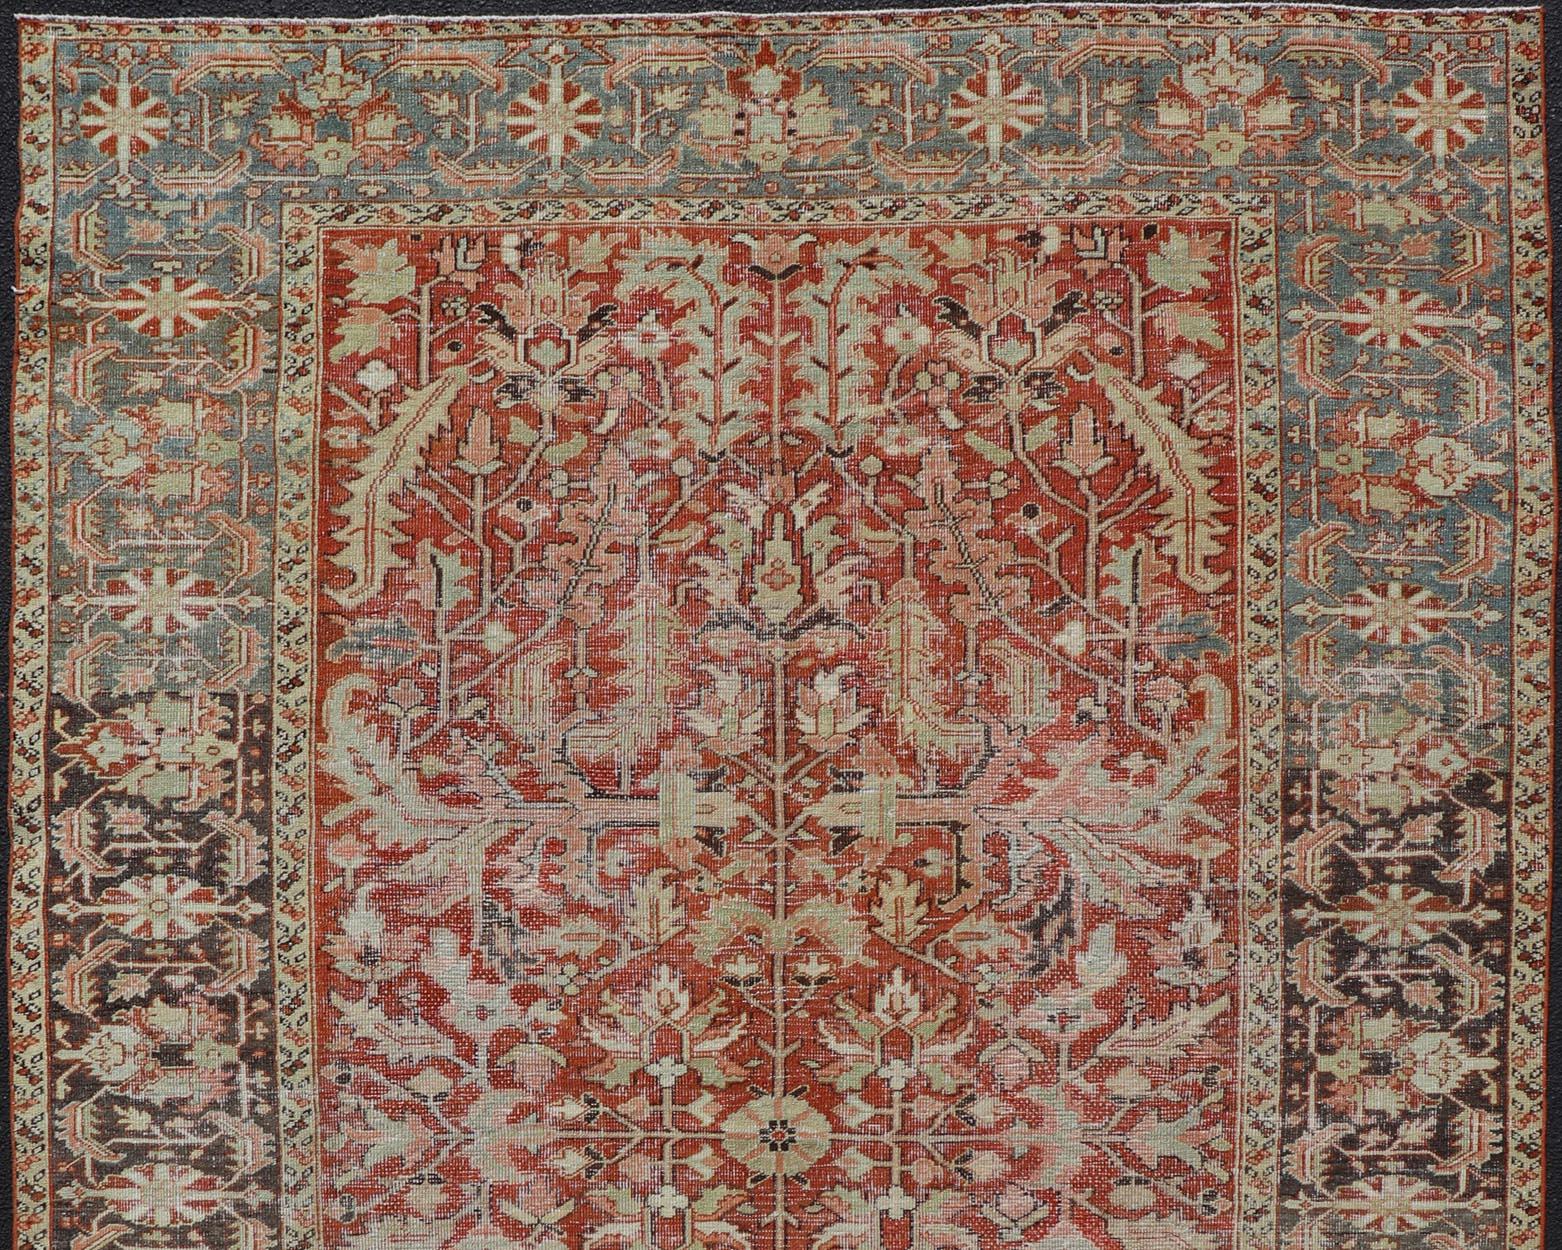 All Over Design Antique Serapi-Heriz Rug With Large Floral Design, Keivan Woven Arts / rug EMB-9541-13588, country of origin / type: Persian / Heriz, circa Early-20th Century.

Measures: 7'7 x 11'

Antique Heriz Rug with Large scale Floral Design in